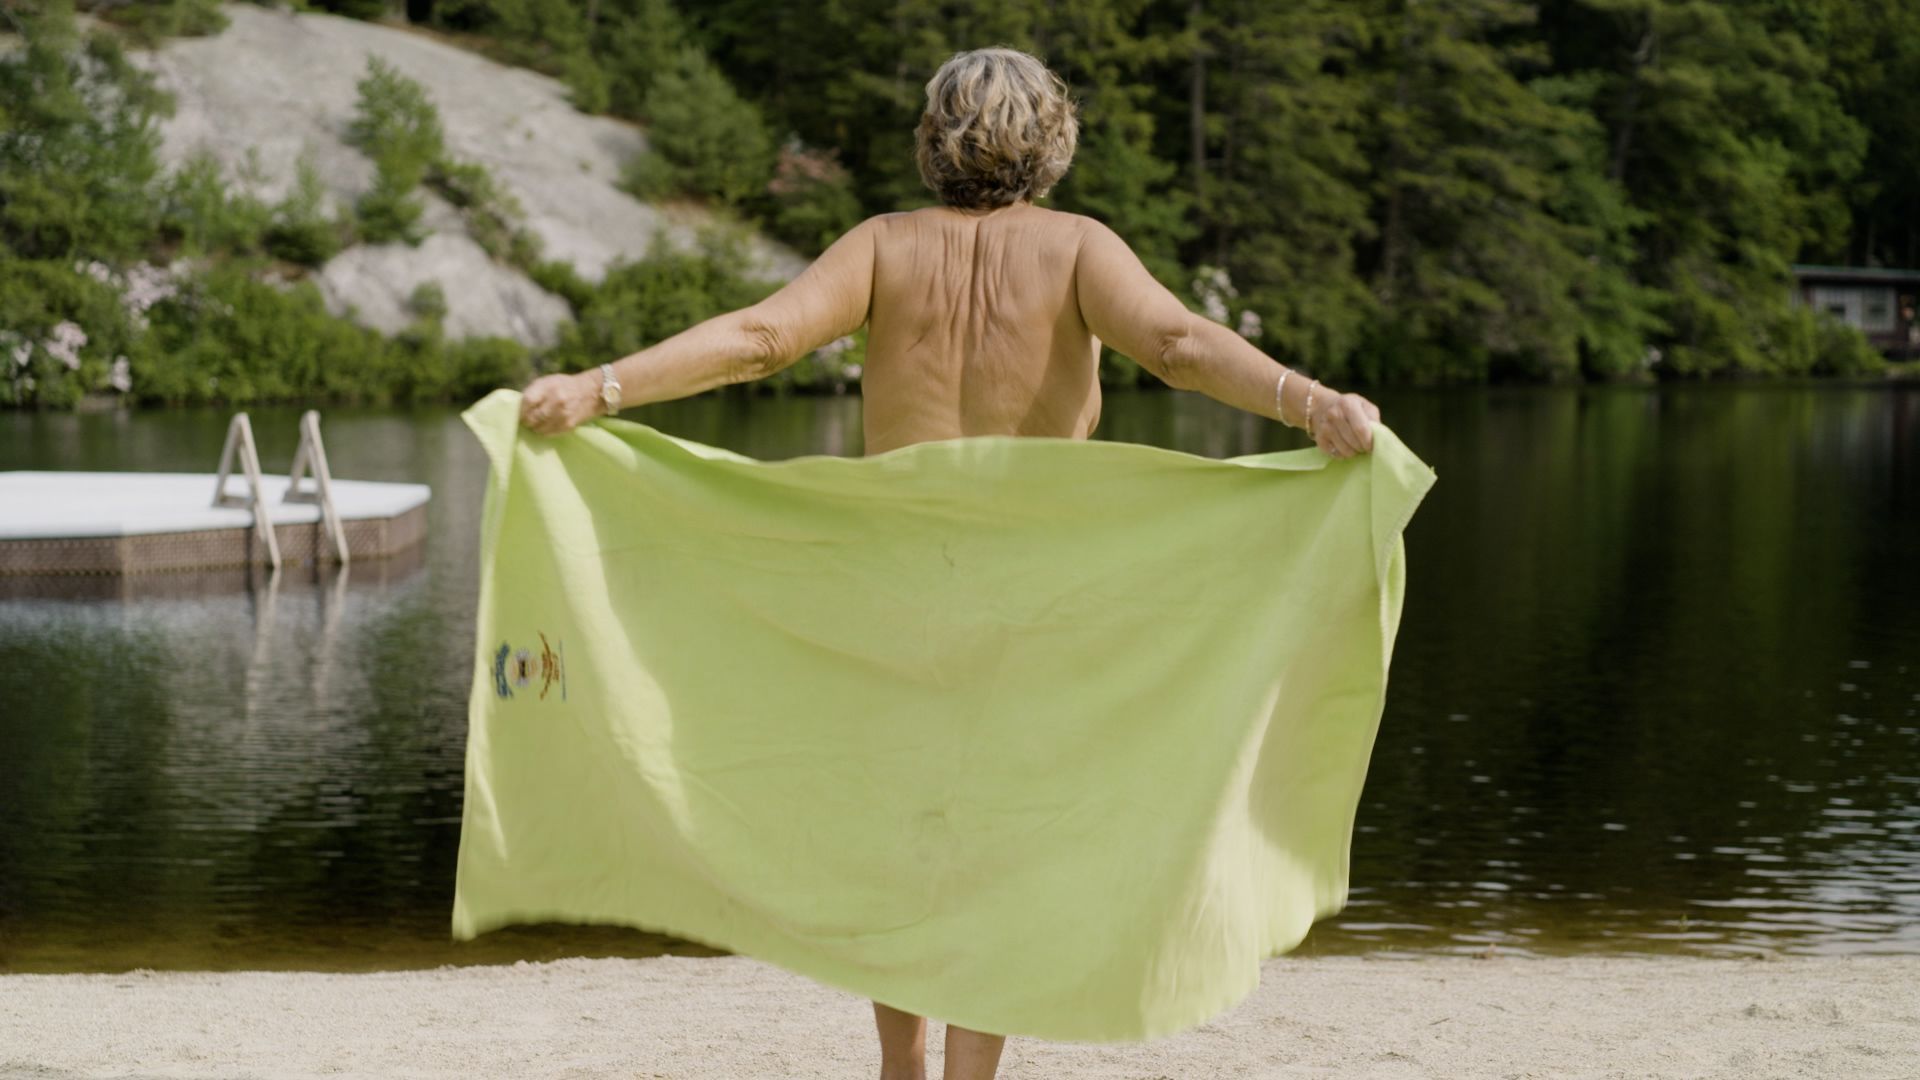 Vintage Naturist Beach Videos - Nudist explains what you should definitely not do at a nude beach | CNN